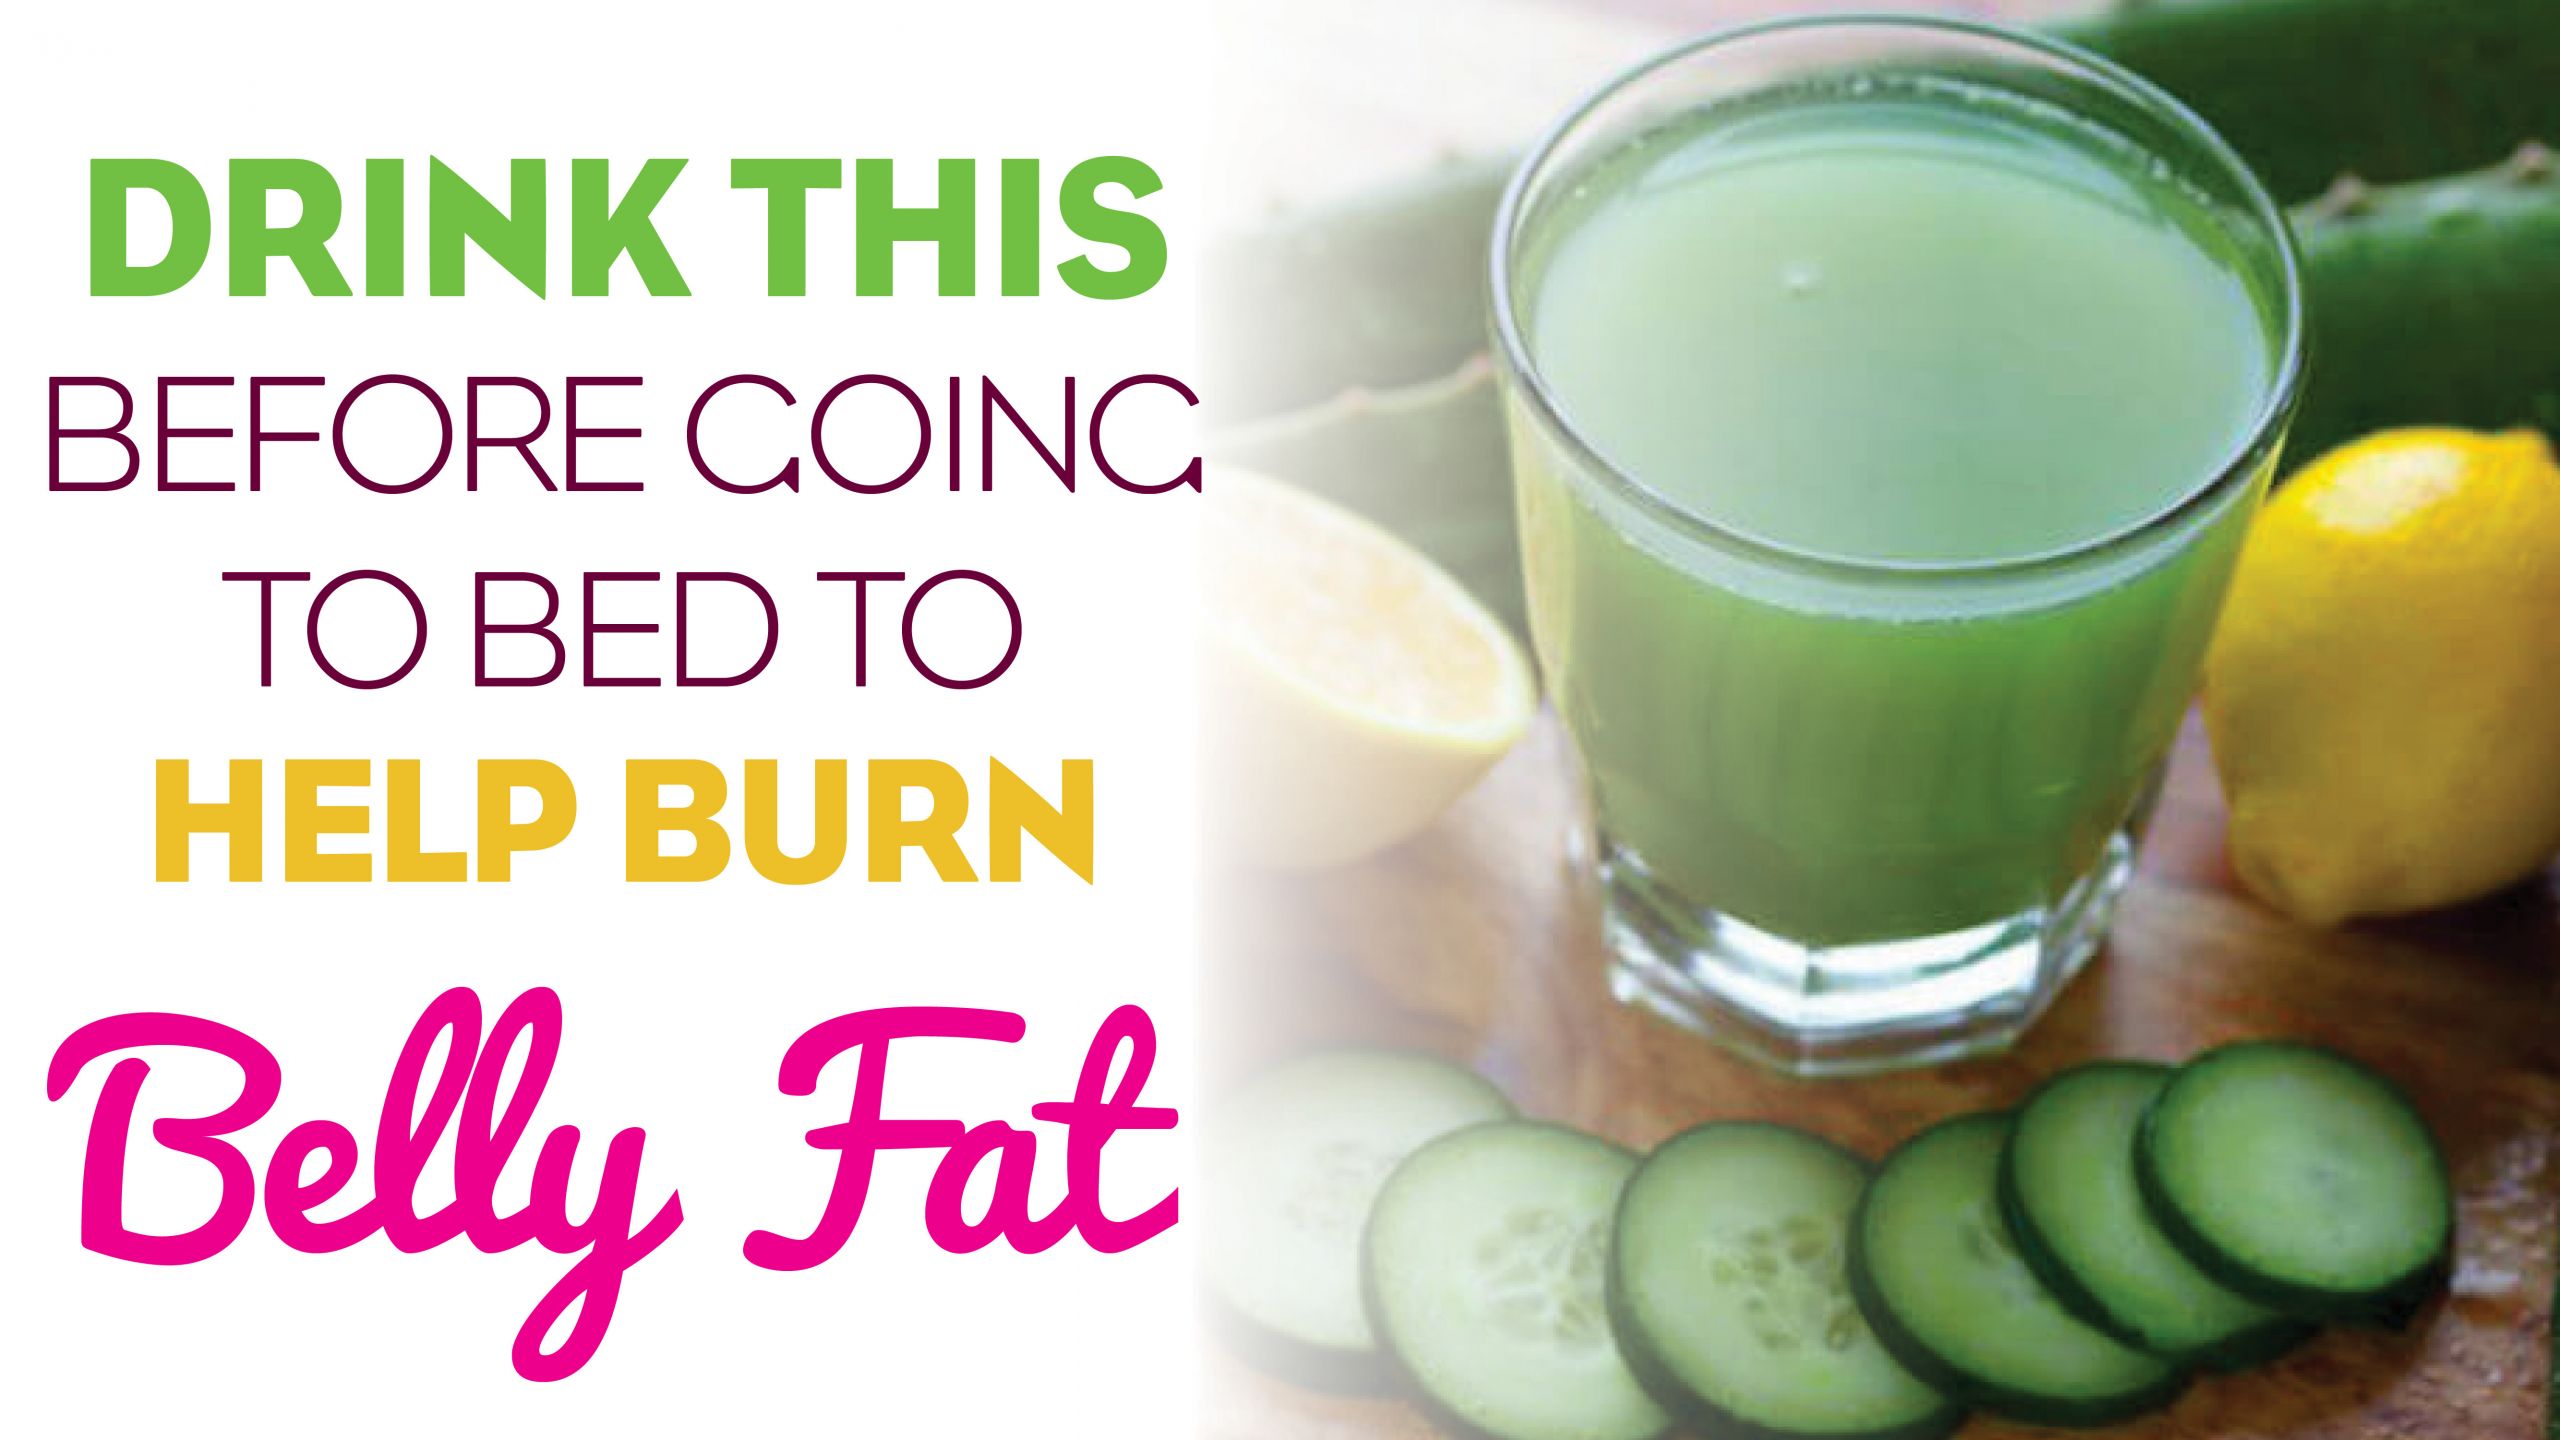 Burn Belly Fat For Men Drinks
 Drink this Fat Burning Drink Before Going to Bed and Burn